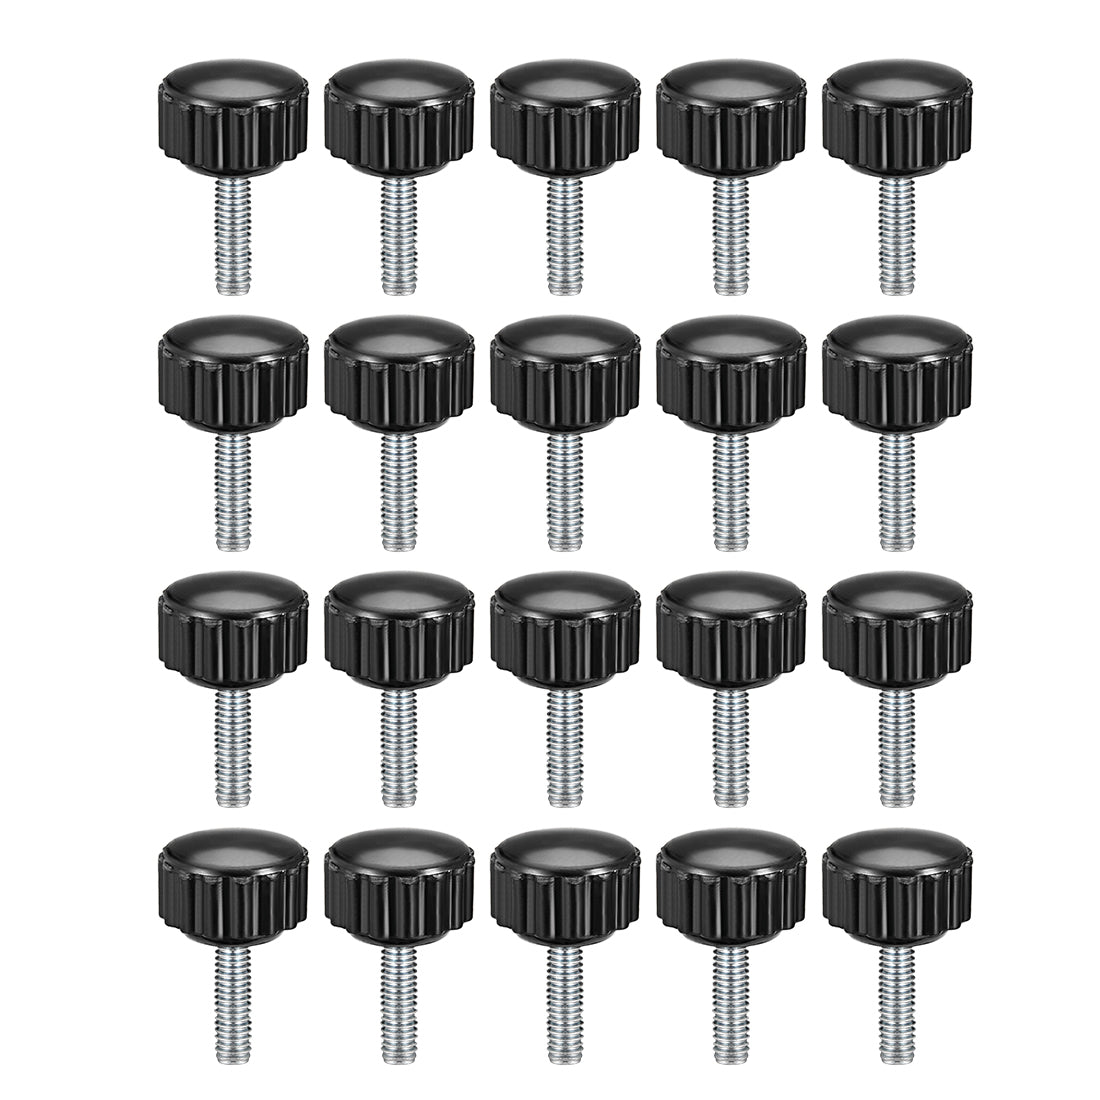 Uxcell Uxcell M6 x 20mm Male Thread Knurled Clamping Knobs Grip Thumb Screw on Type  20 Pcs